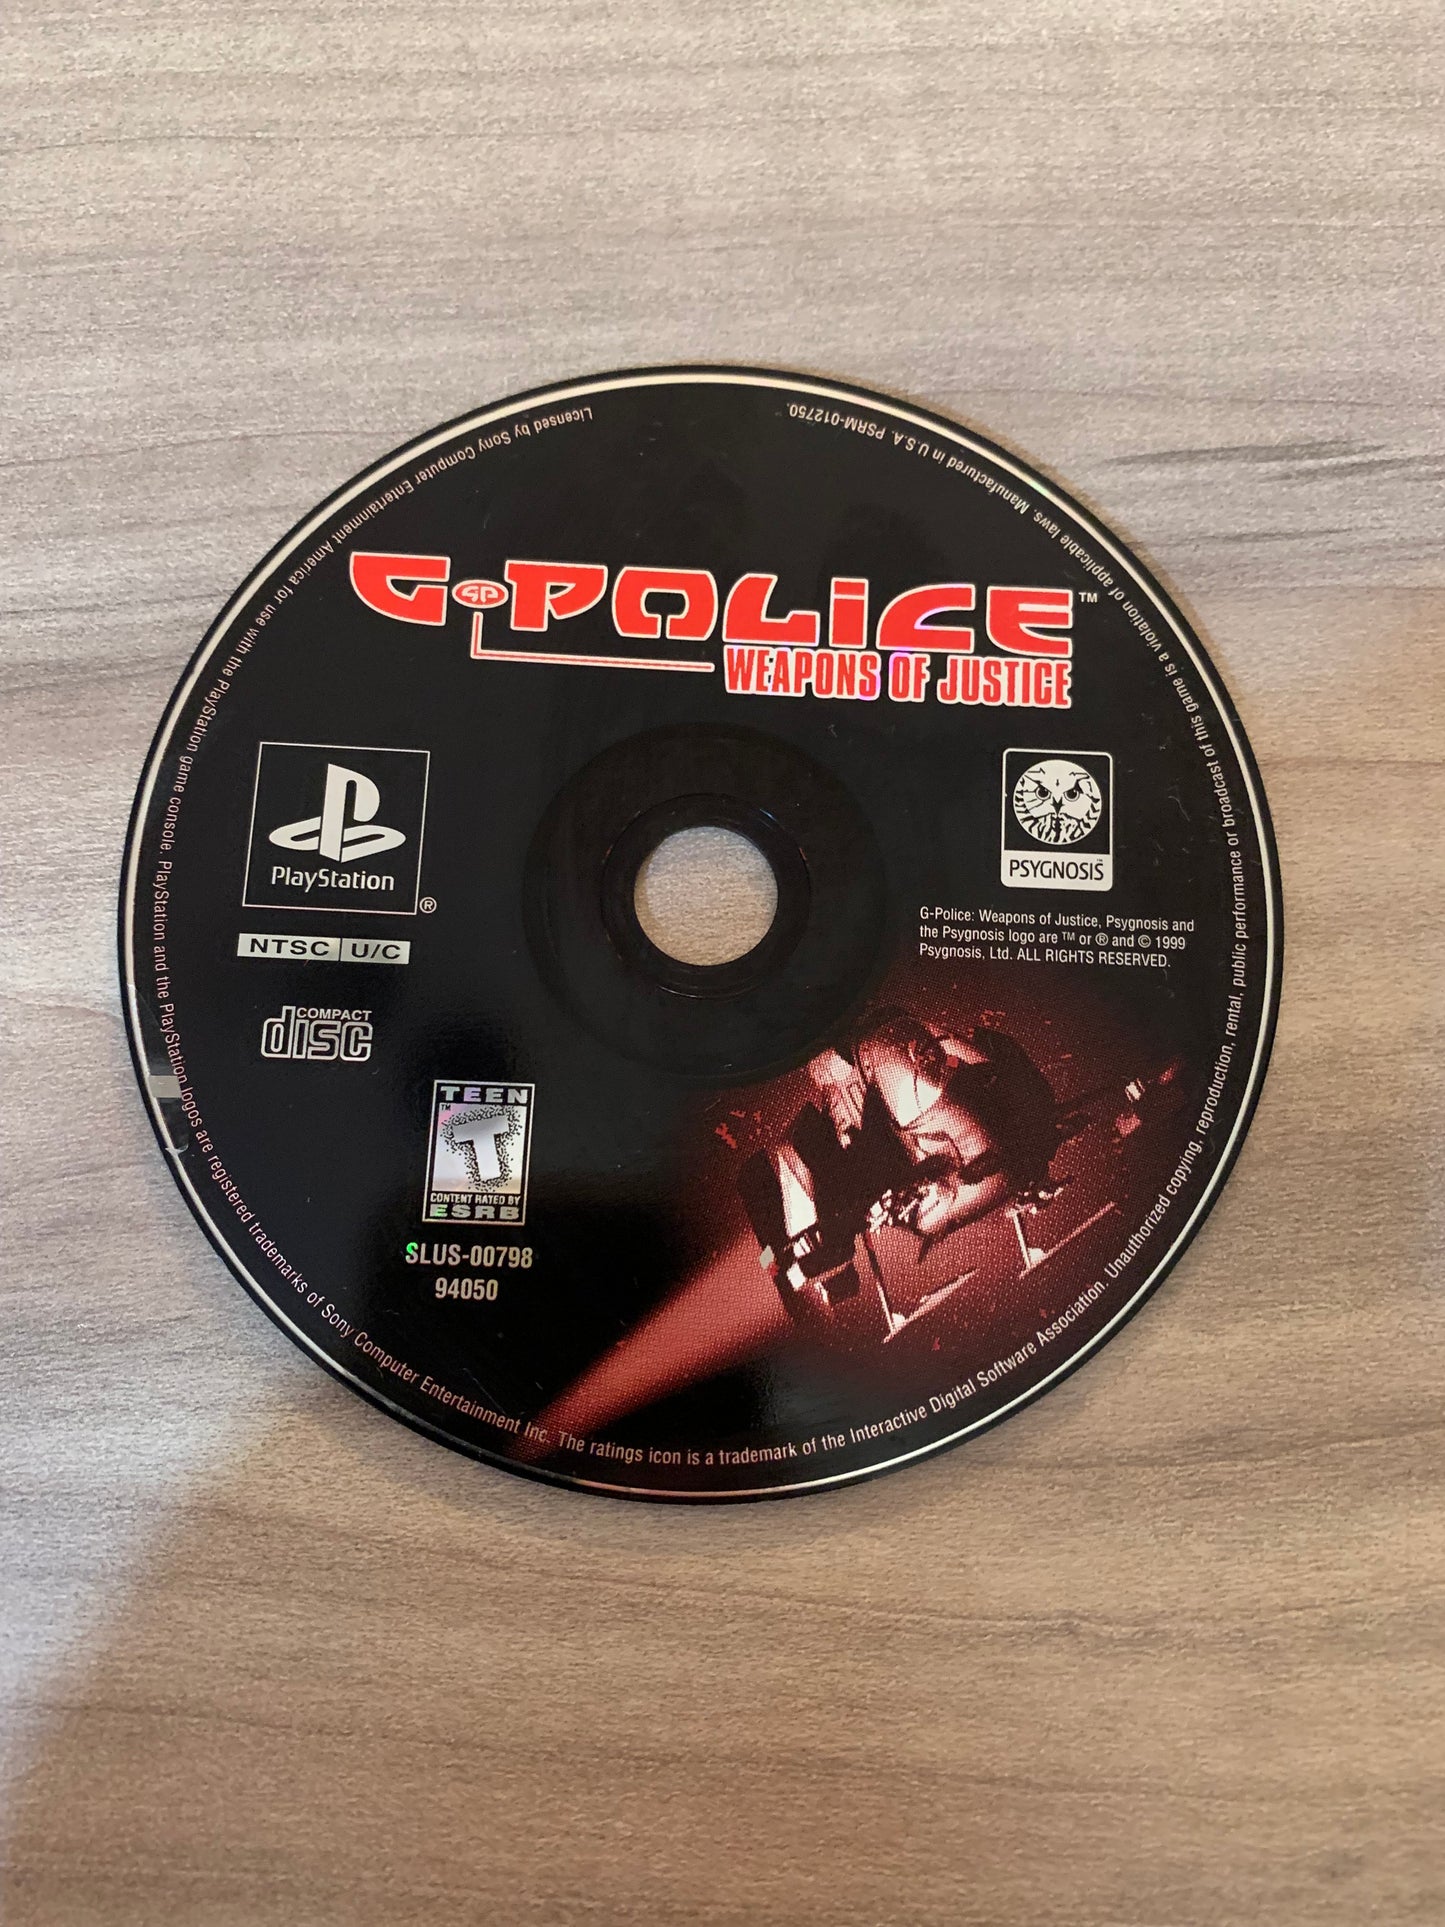 PiXEL-RETRO.COM : SONY PLAYSTATION 1 (PS1) GAME NTSC G-POLICE WEAPONS OF JUSTICE